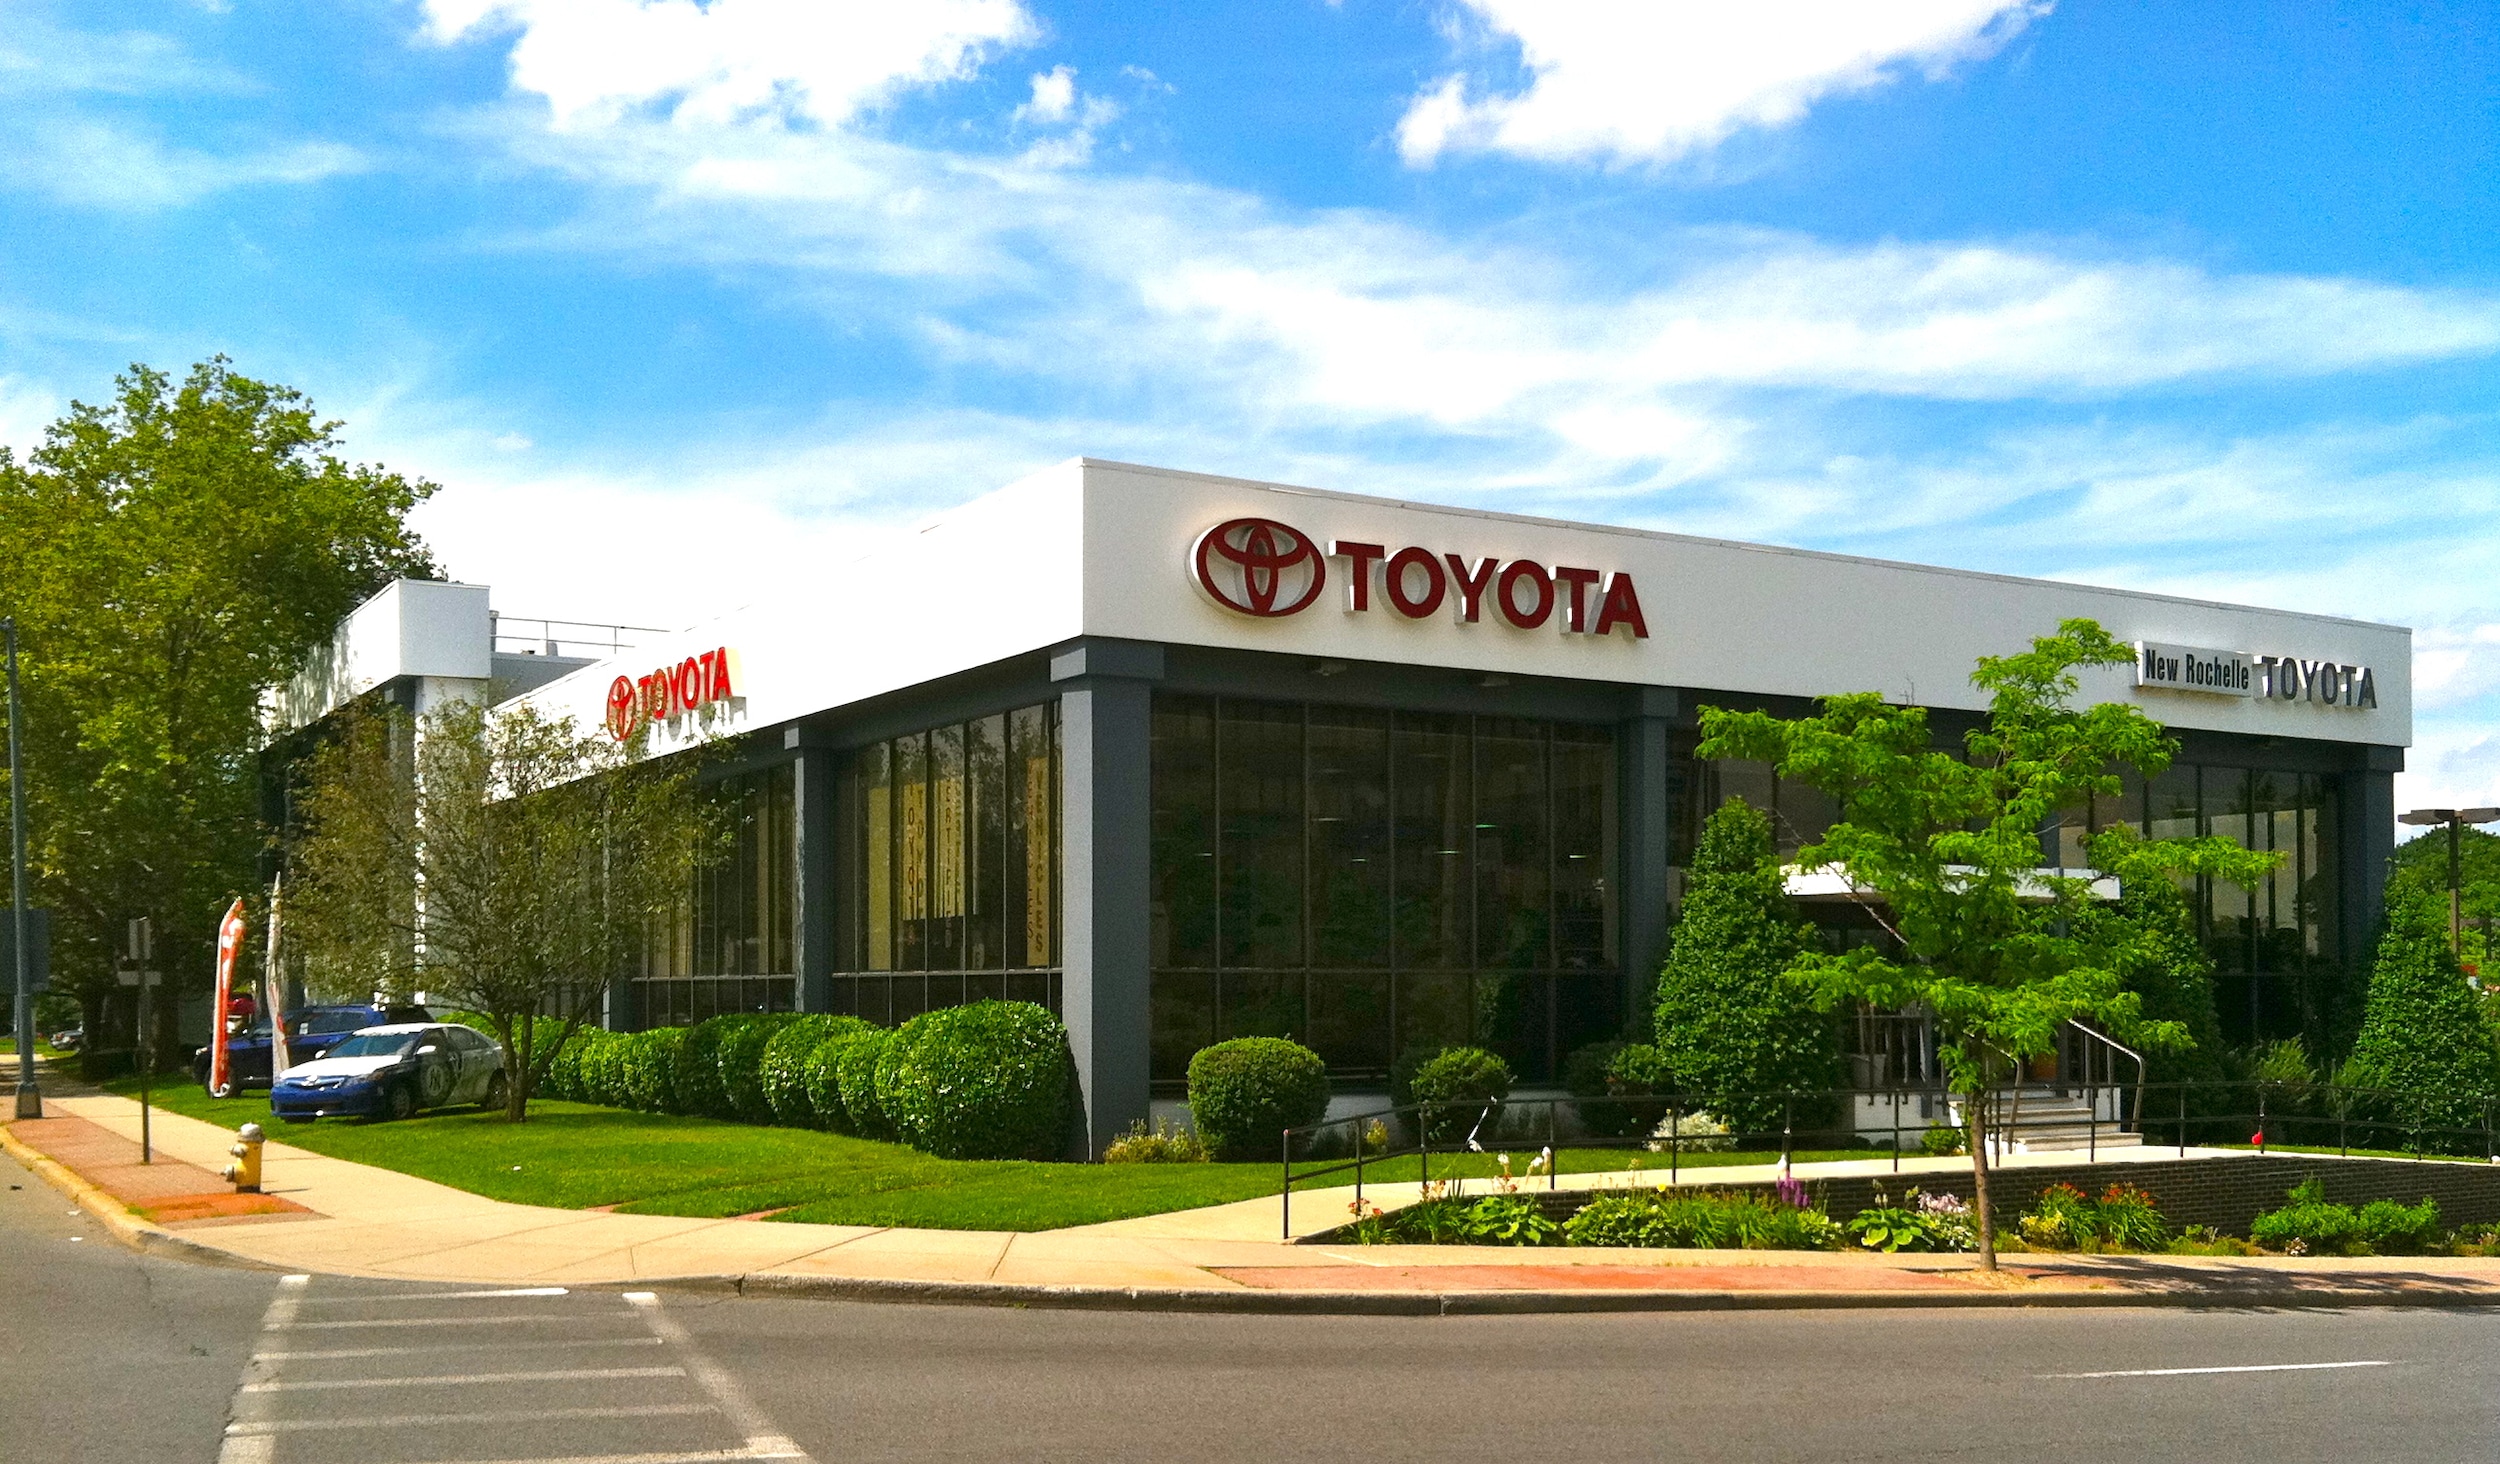 Used toyota dealerships in south jersey